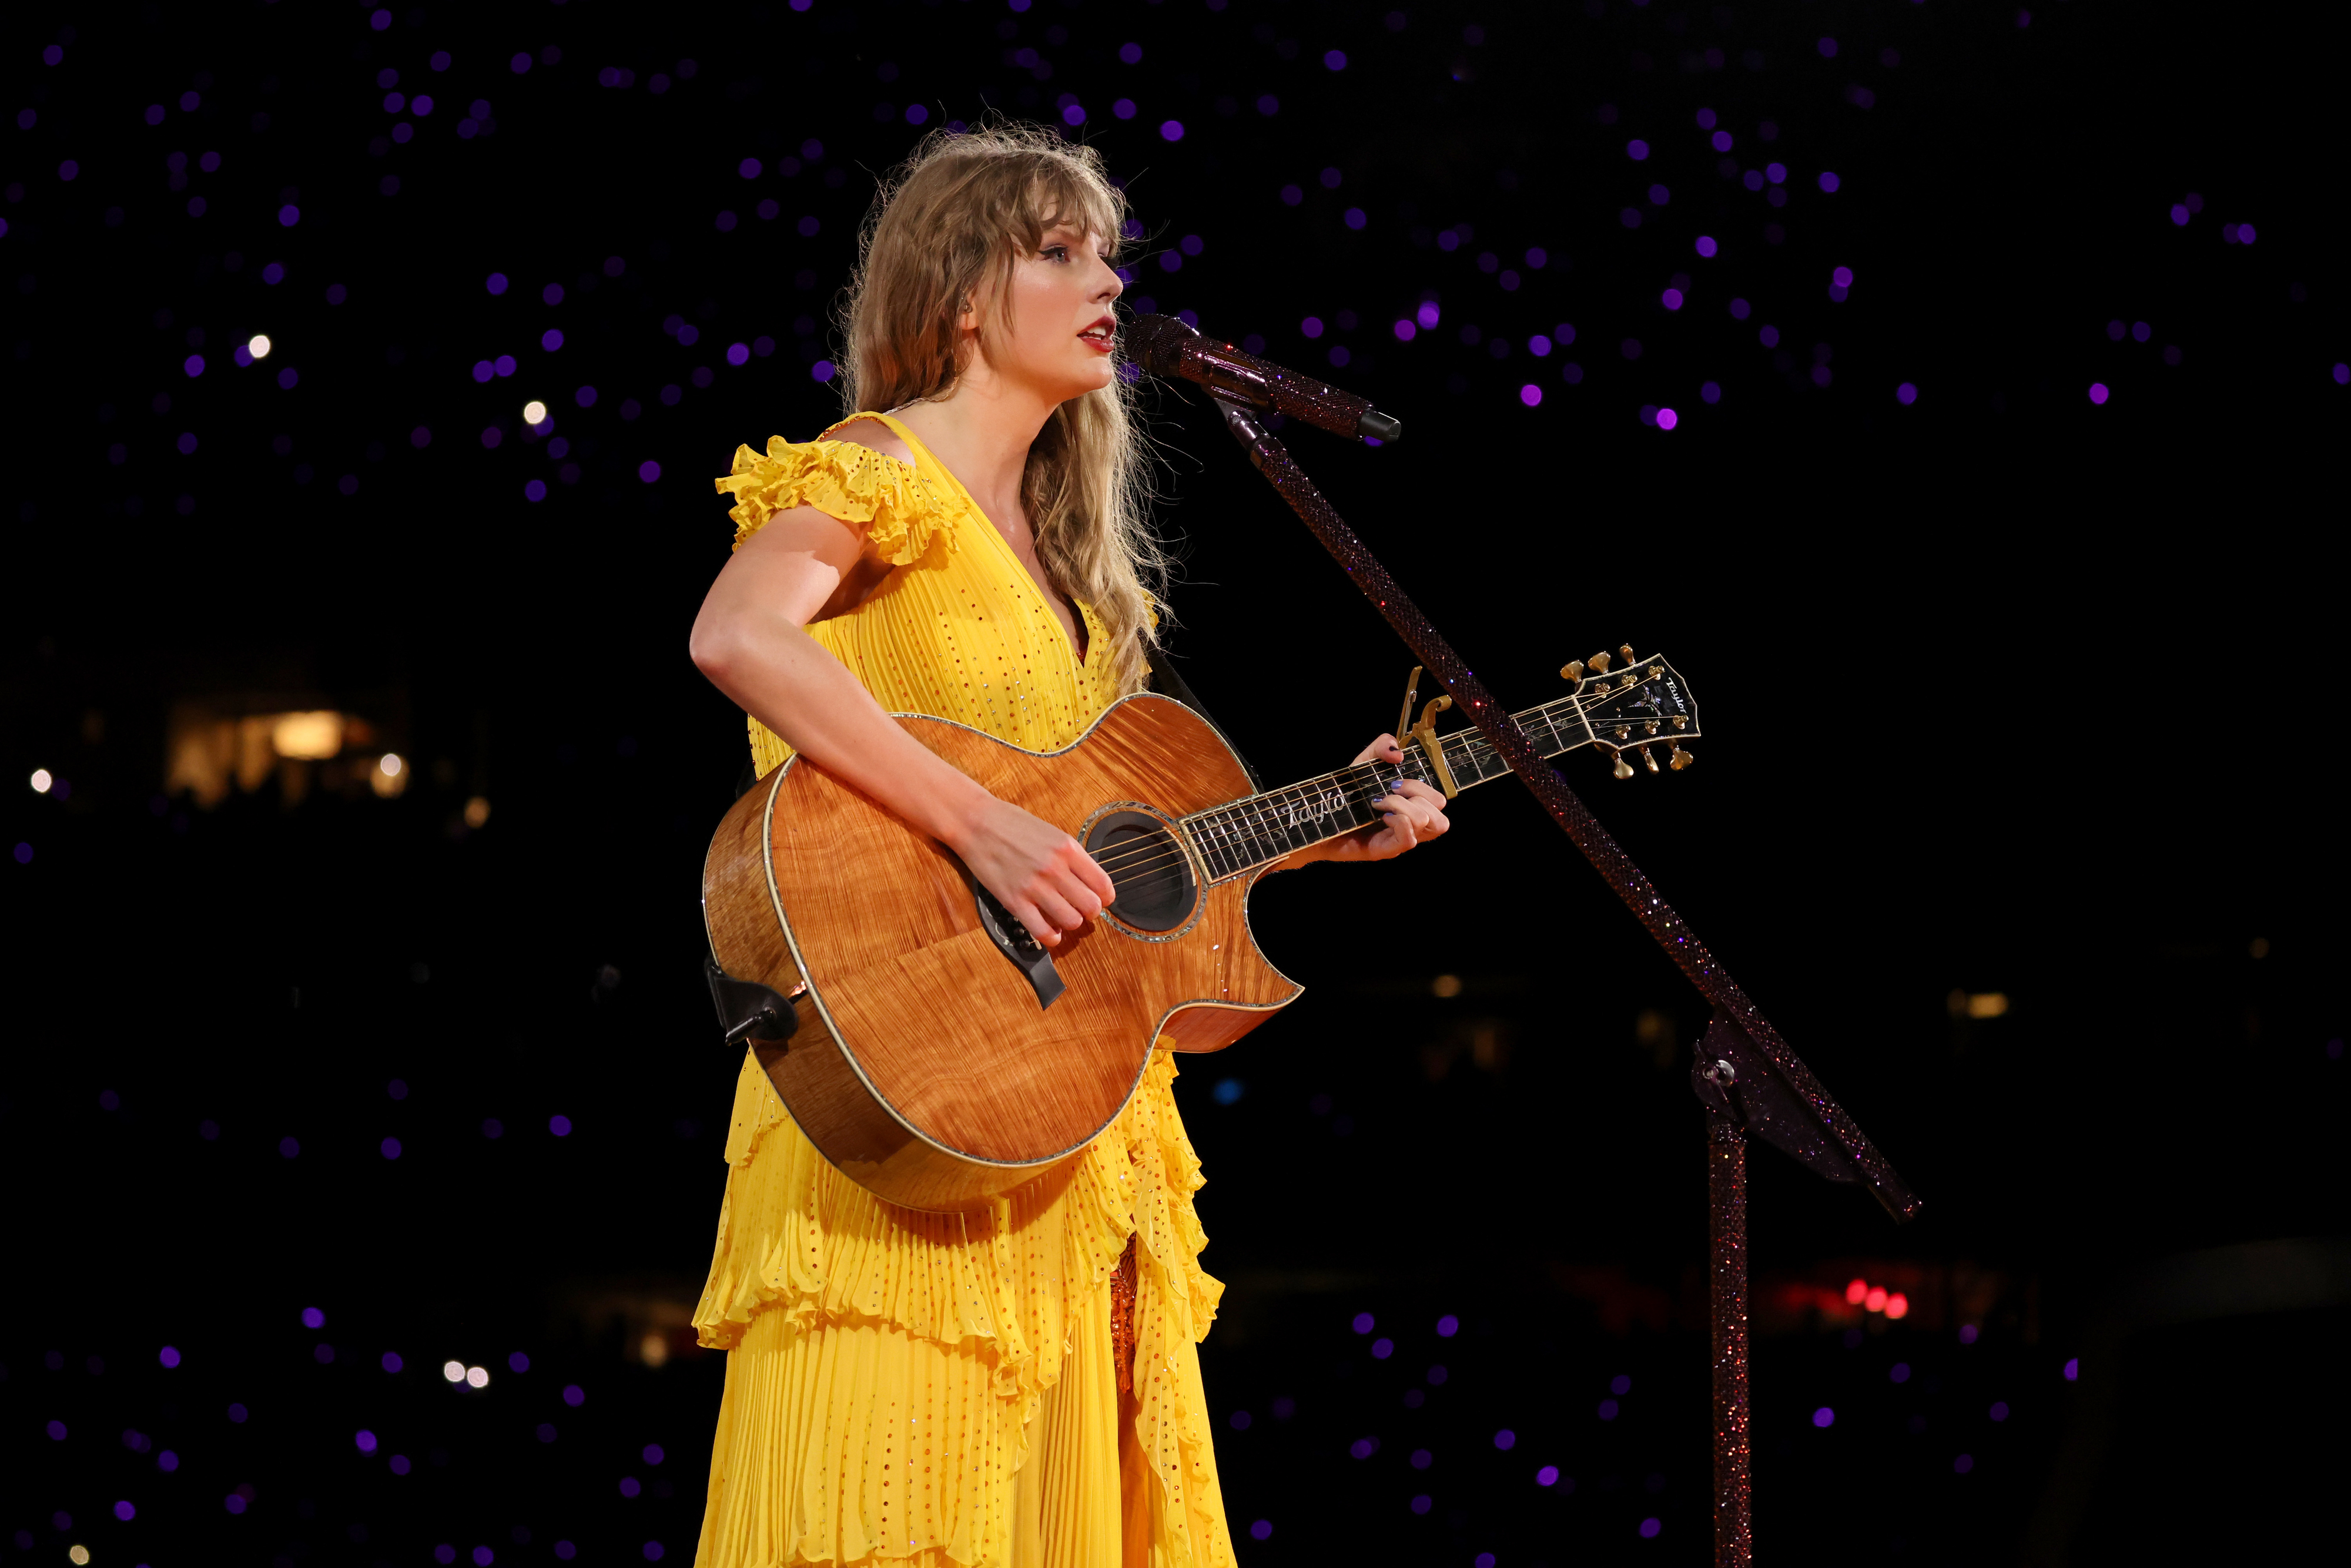 Taylor Swift performing during The Eras Tour in a yellow dress